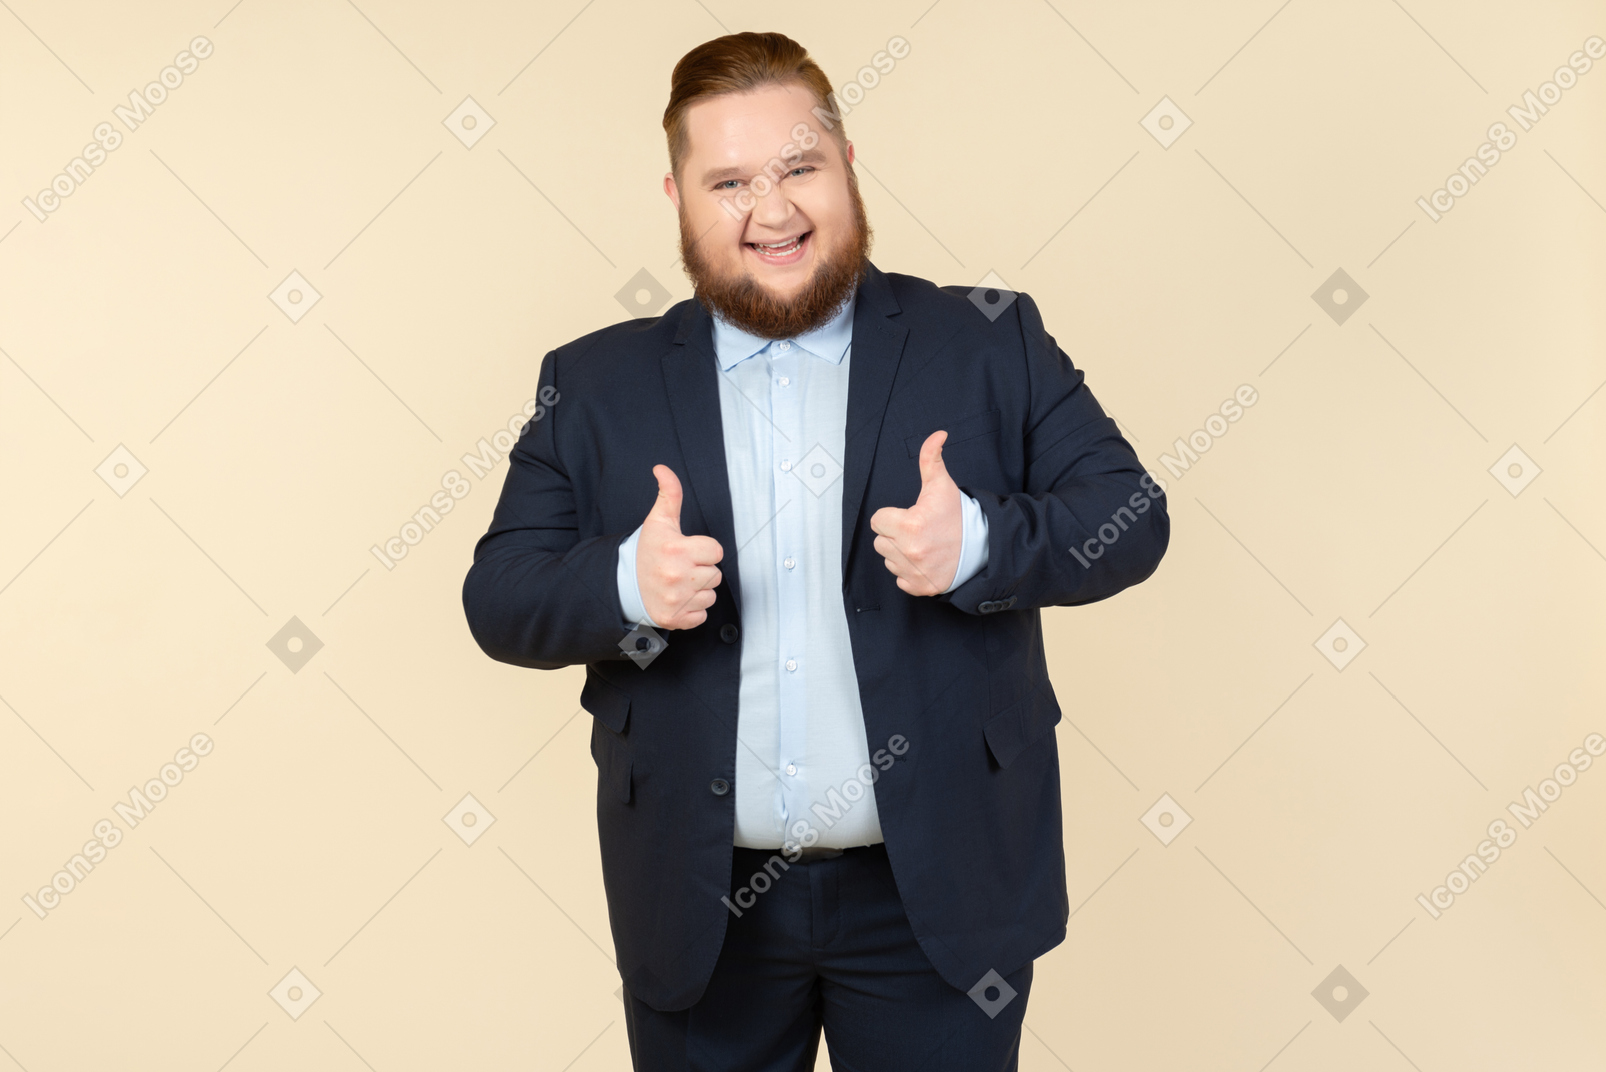 Laughing young overweight man in suit showing thumbs up with both hands